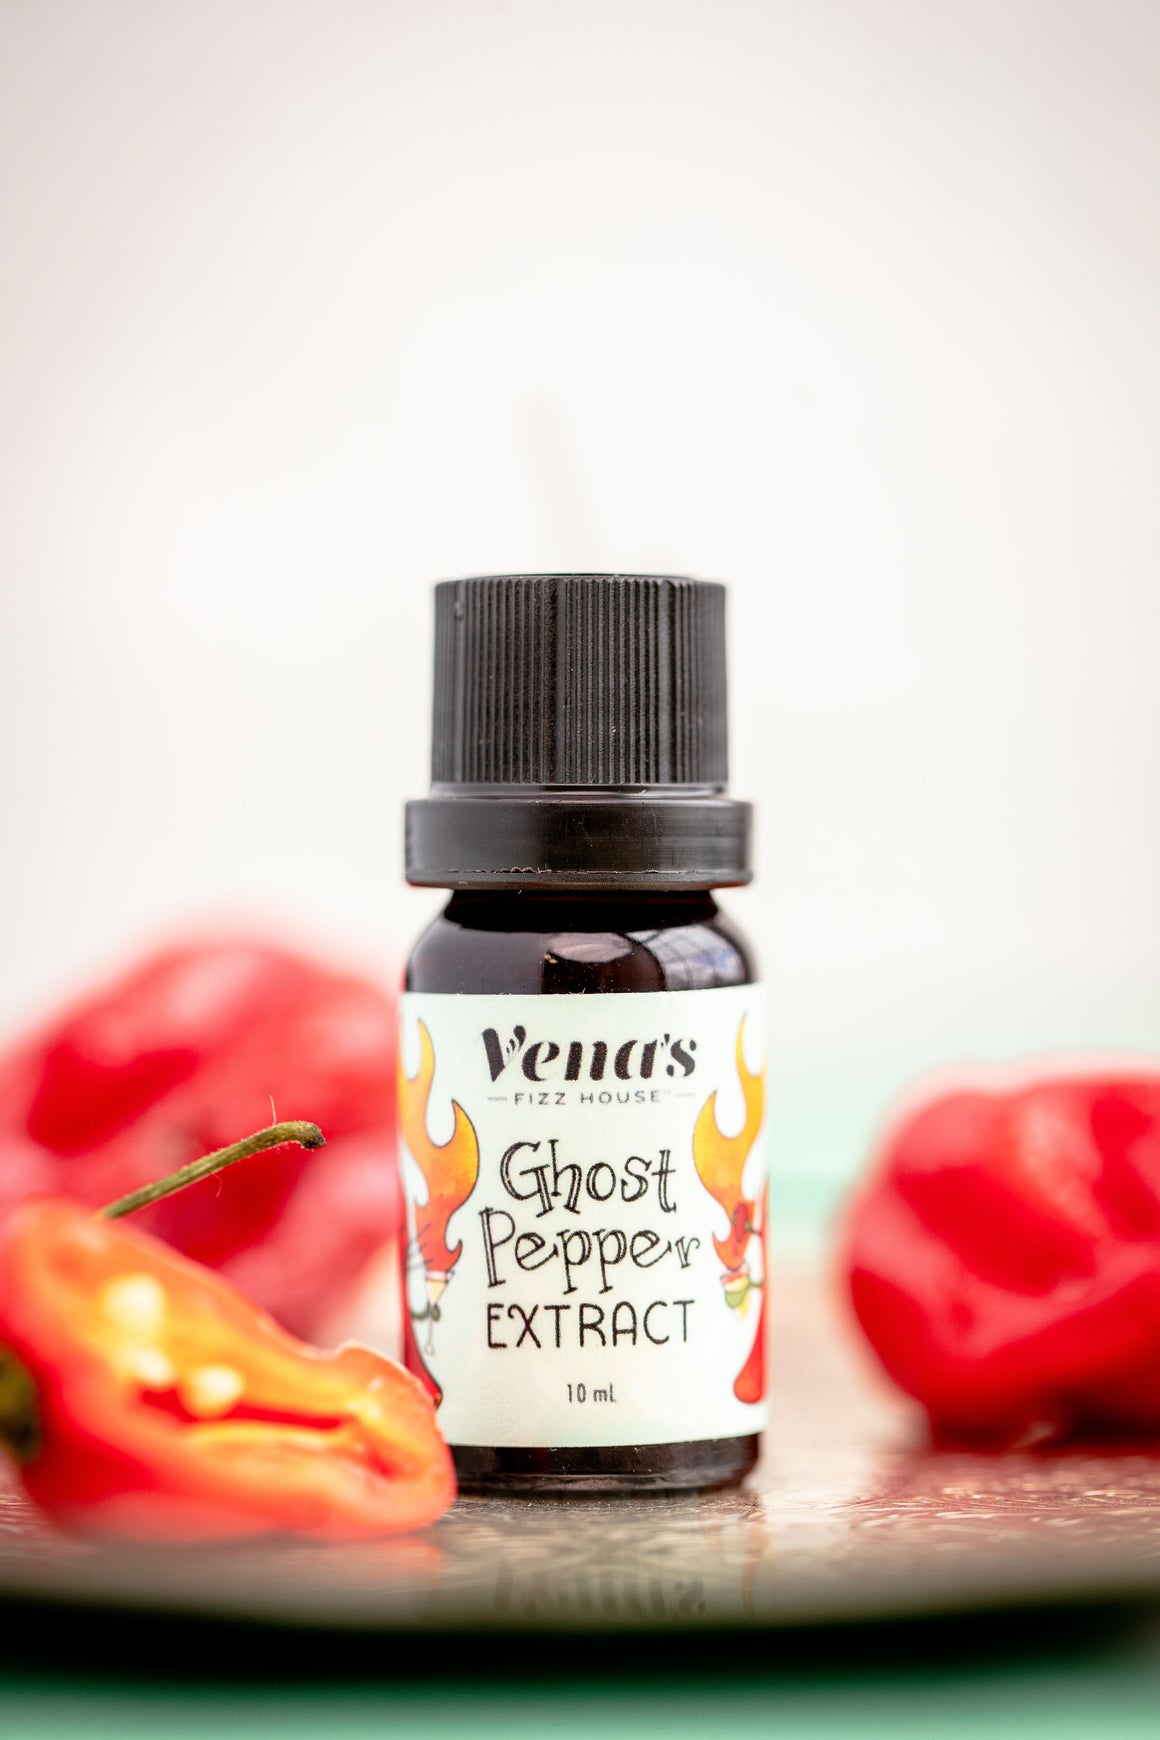 Vena's Ghost Pepper Extract ($72.00 Retail/$43.20 WS)